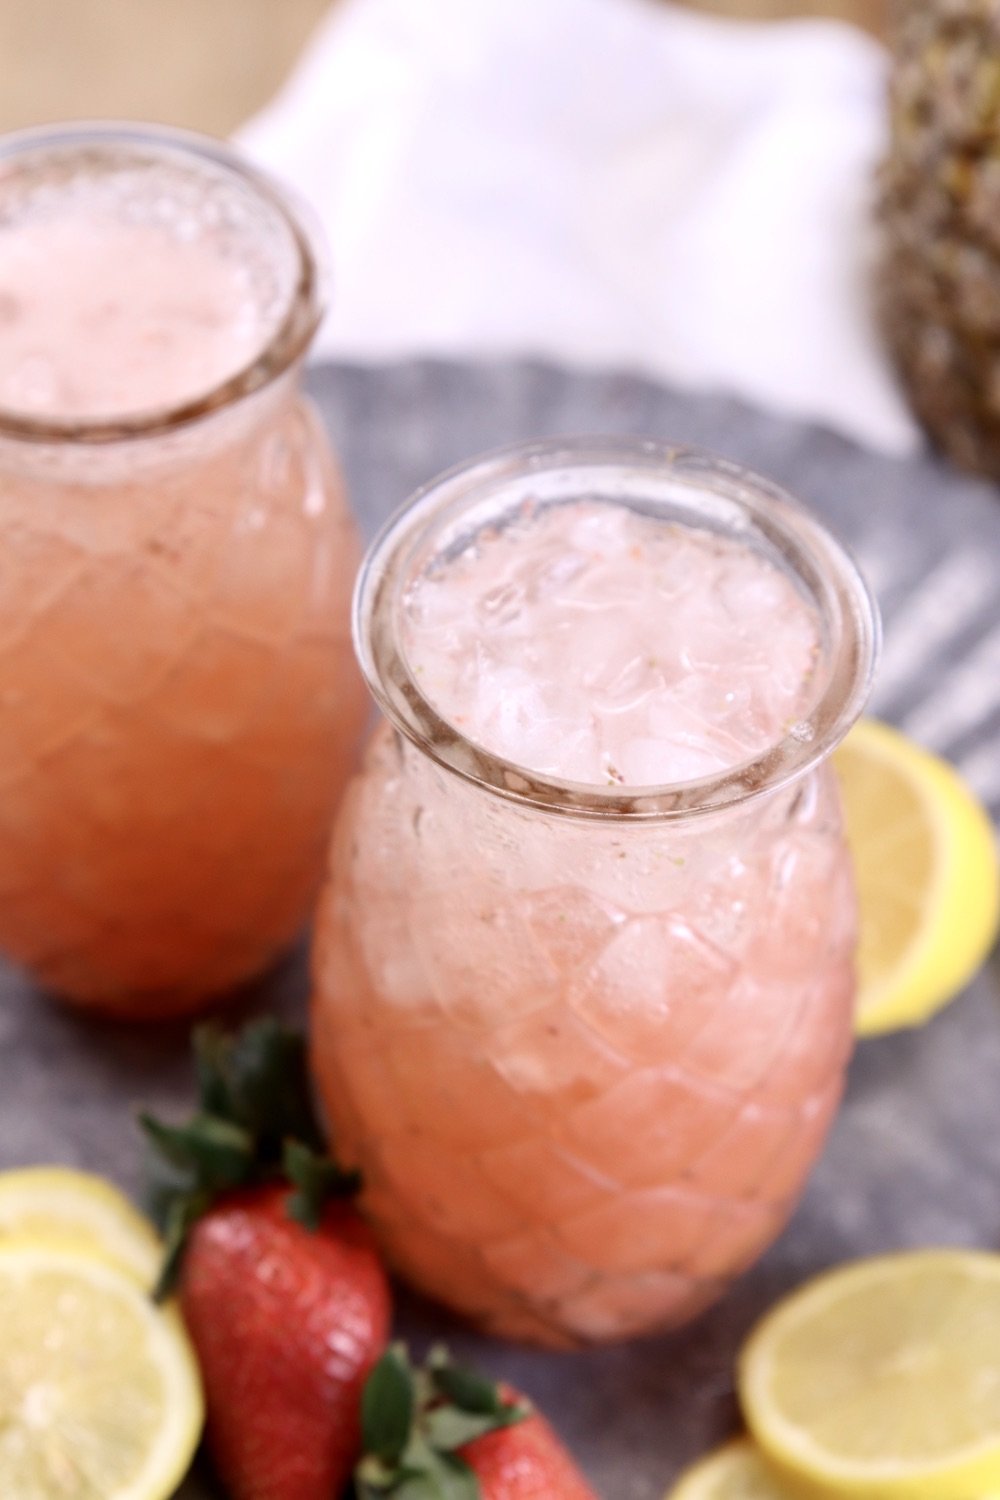 pineapple shaped glasses with strawberry lemonade cocktail